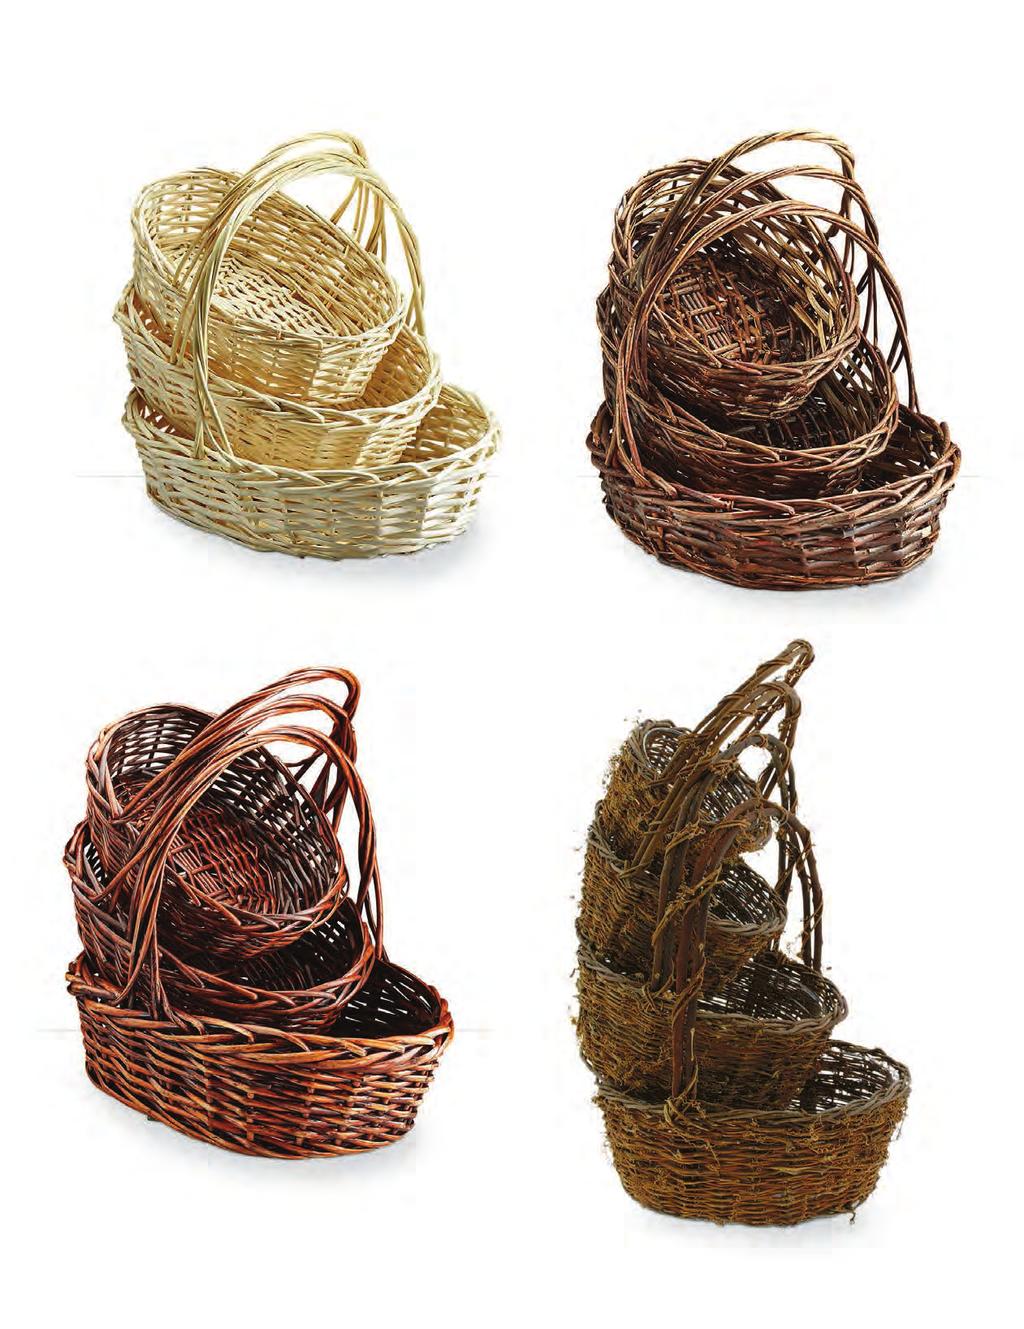 Set/3 Oval Willow Baskets Large: 17 x 15 x 6 Small: 13 x 10 x 4.5 Includes Hard Plastic Liners 1005/3-NAT 4/$17.99 set 1005/3-UP 4/$17.99 set 30033 Set/4 Round Willow Twiggy Vine Basket Large: 12.